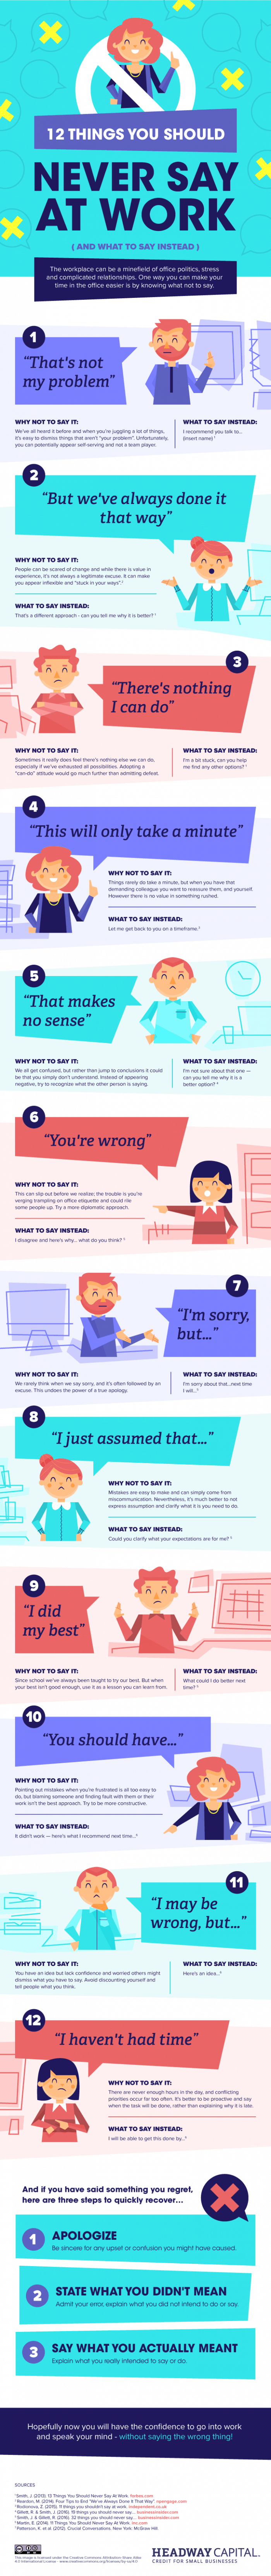 12 things not to say at work